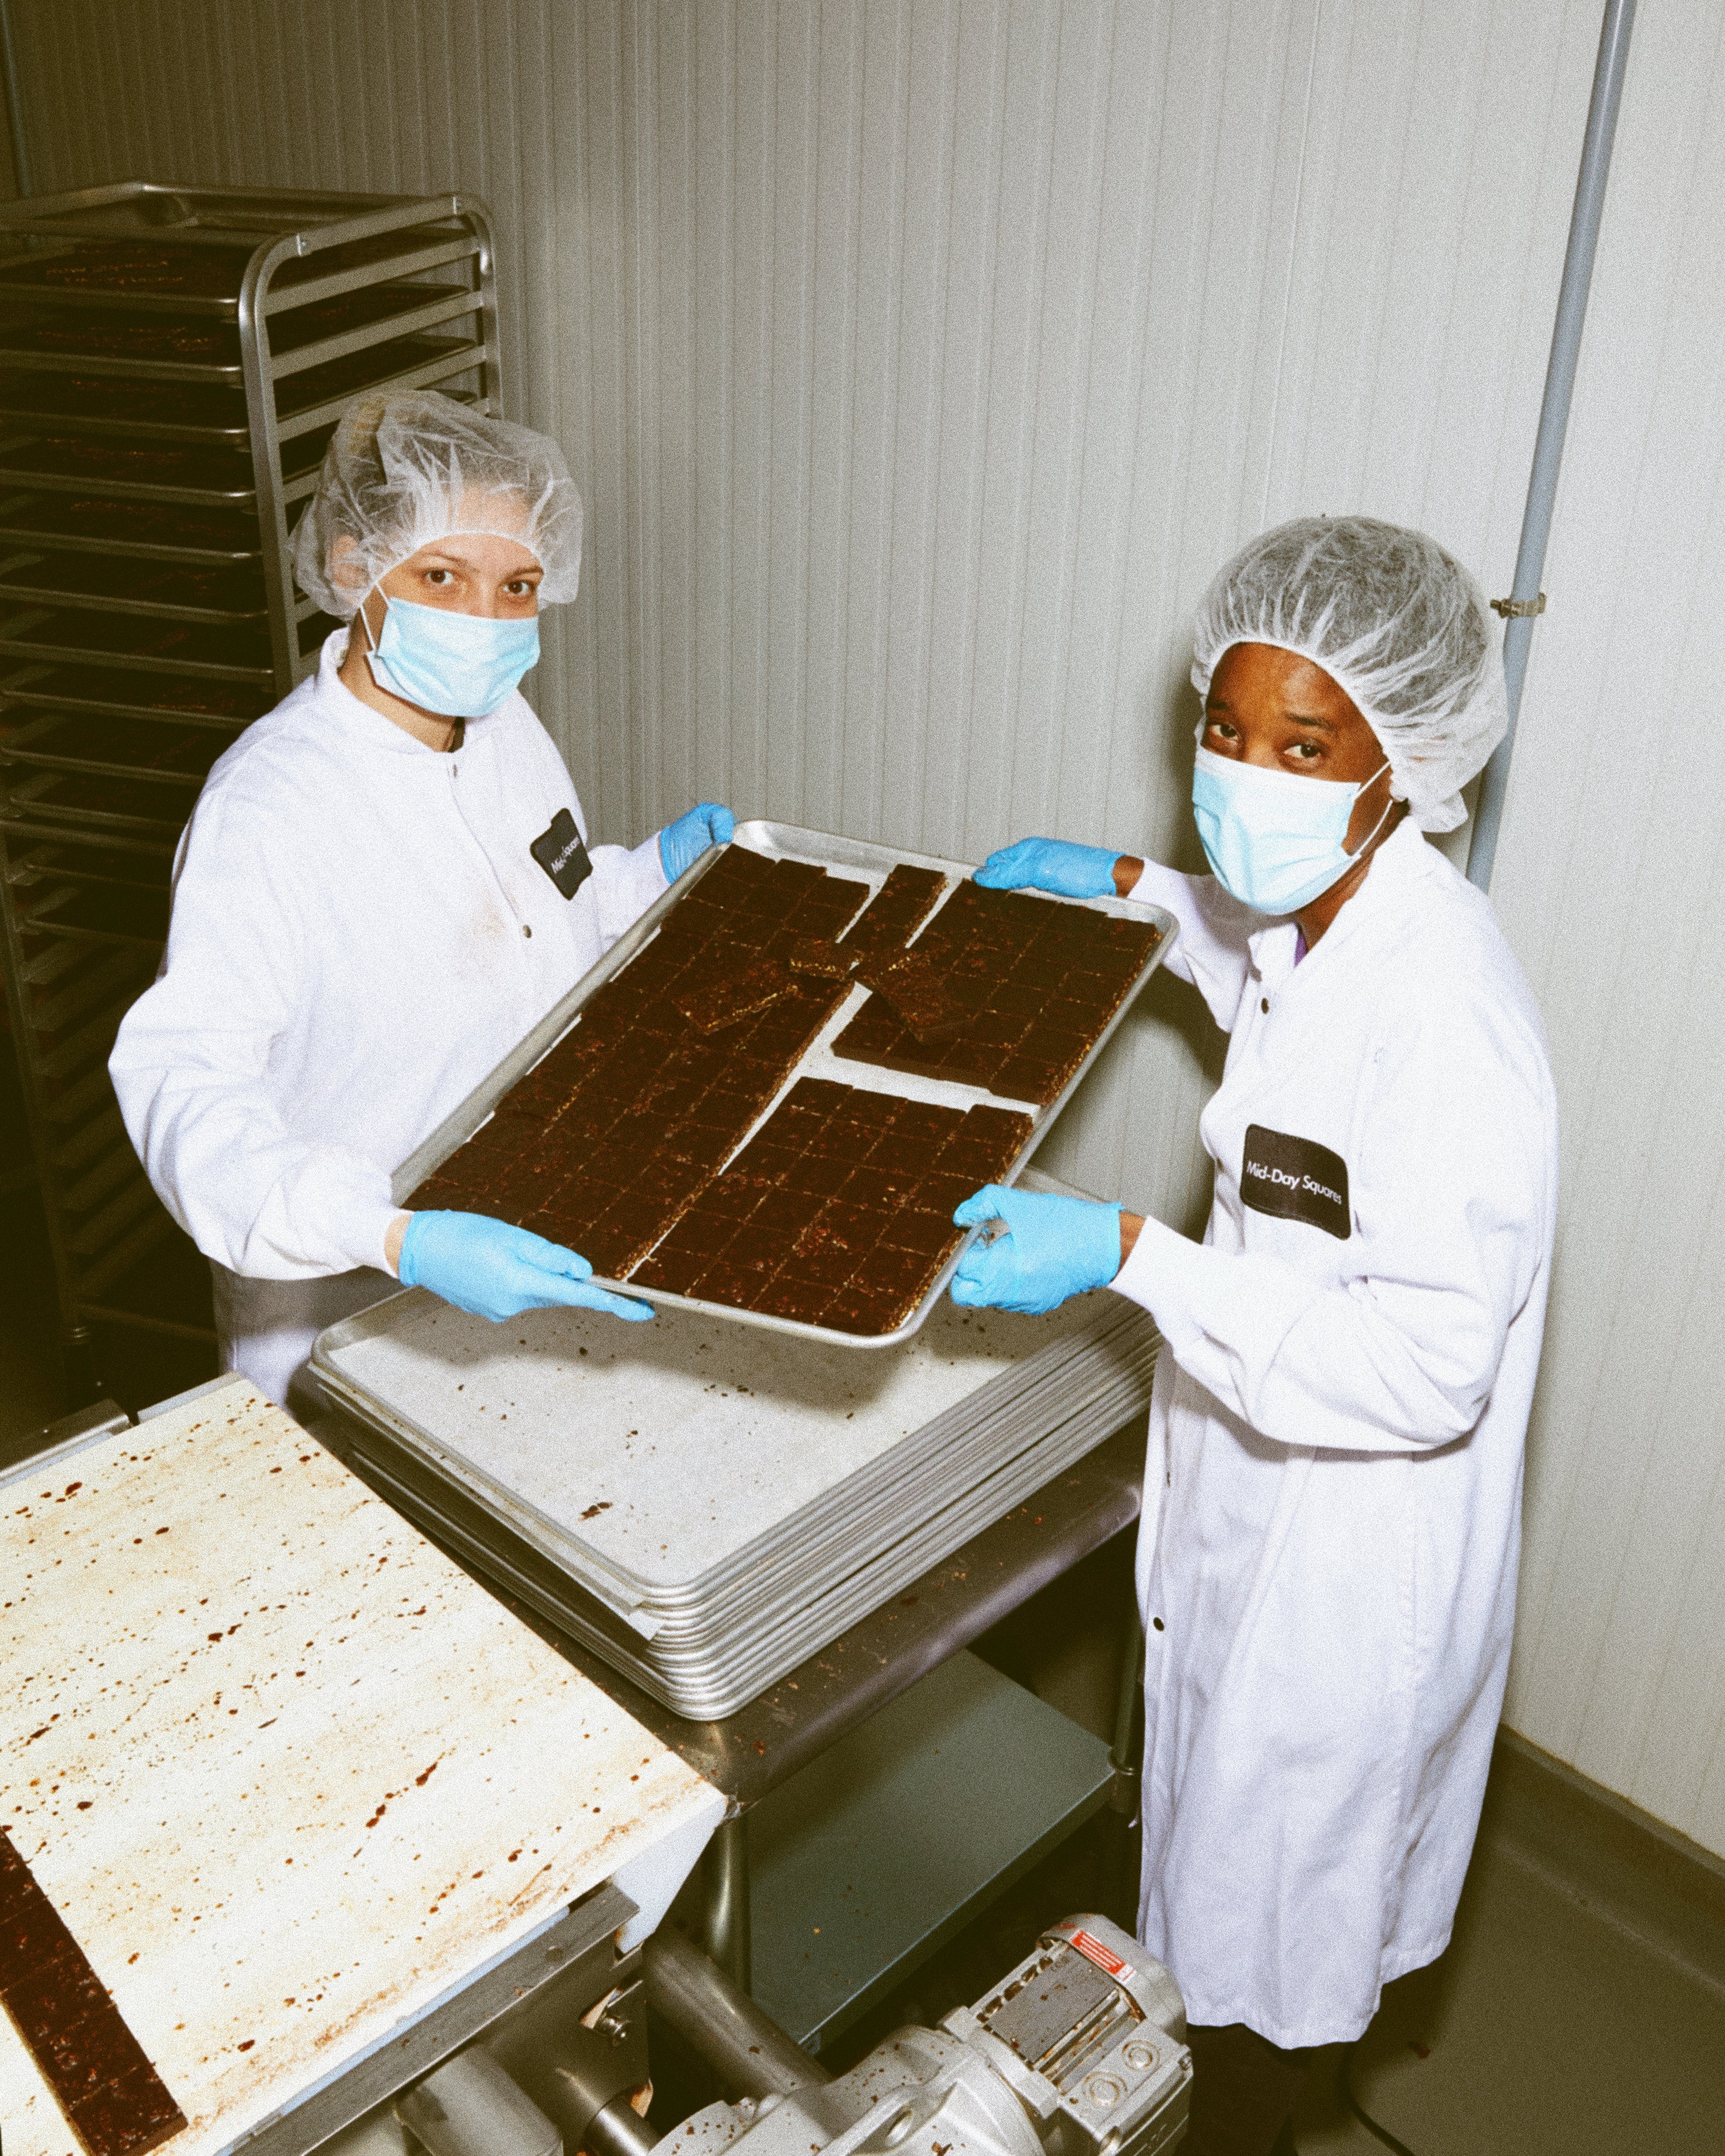 Two Mid-Day Squares employees making a batch of chocolate.